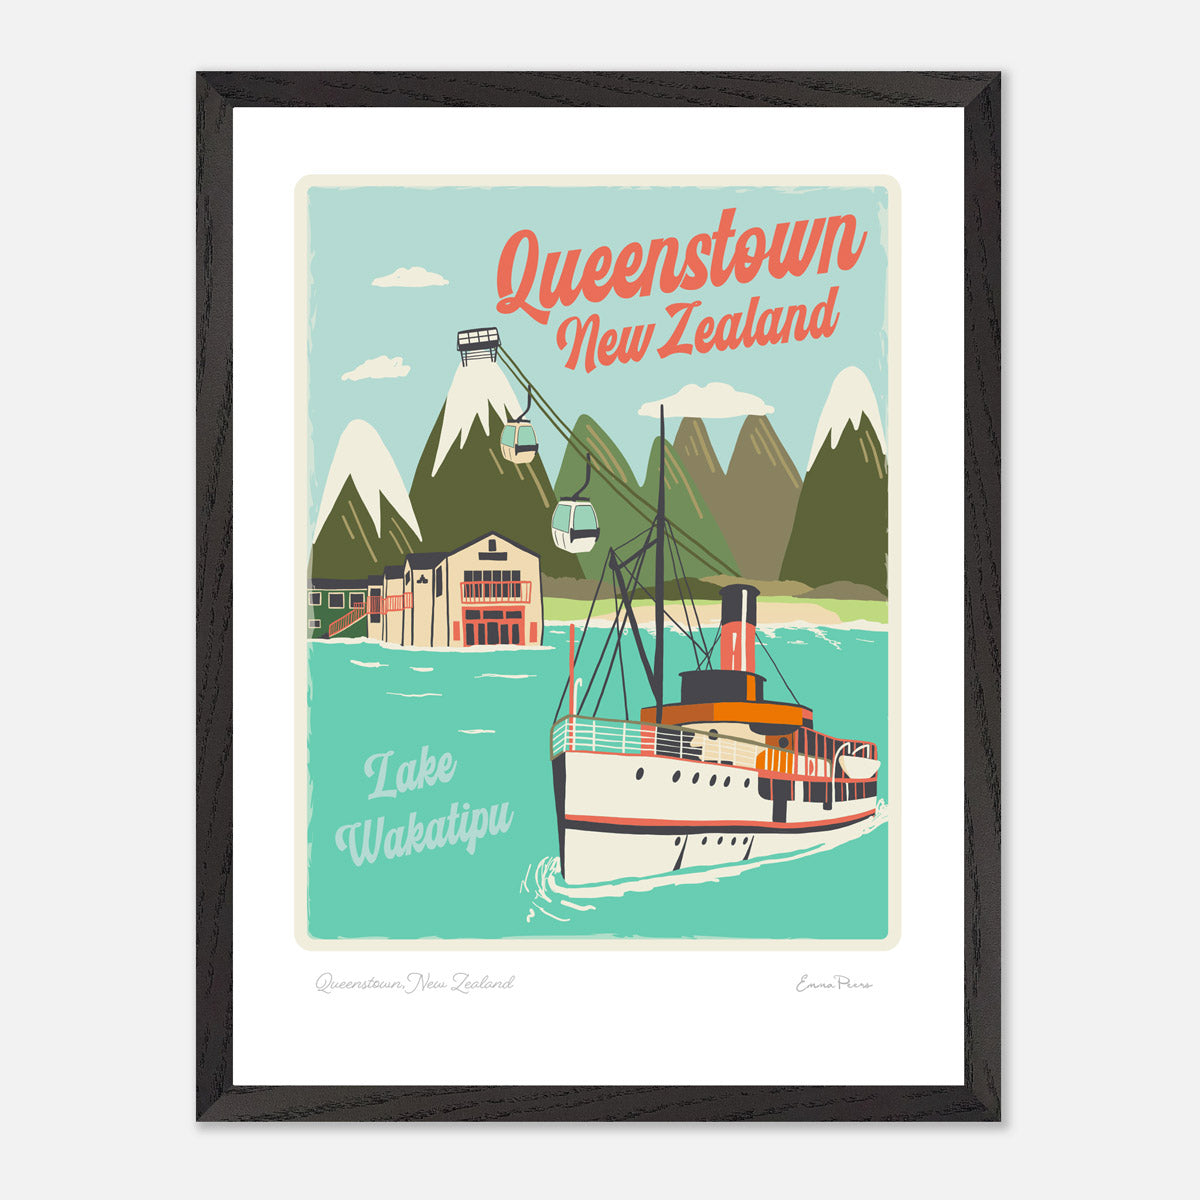 Framed Travel Poster of Queenstown New Zealand. Illustration Art Print of Queenstown, New Zealand by Studio Peers showing lake wakatipu, skyline gondola and The Earnslaw A3 size